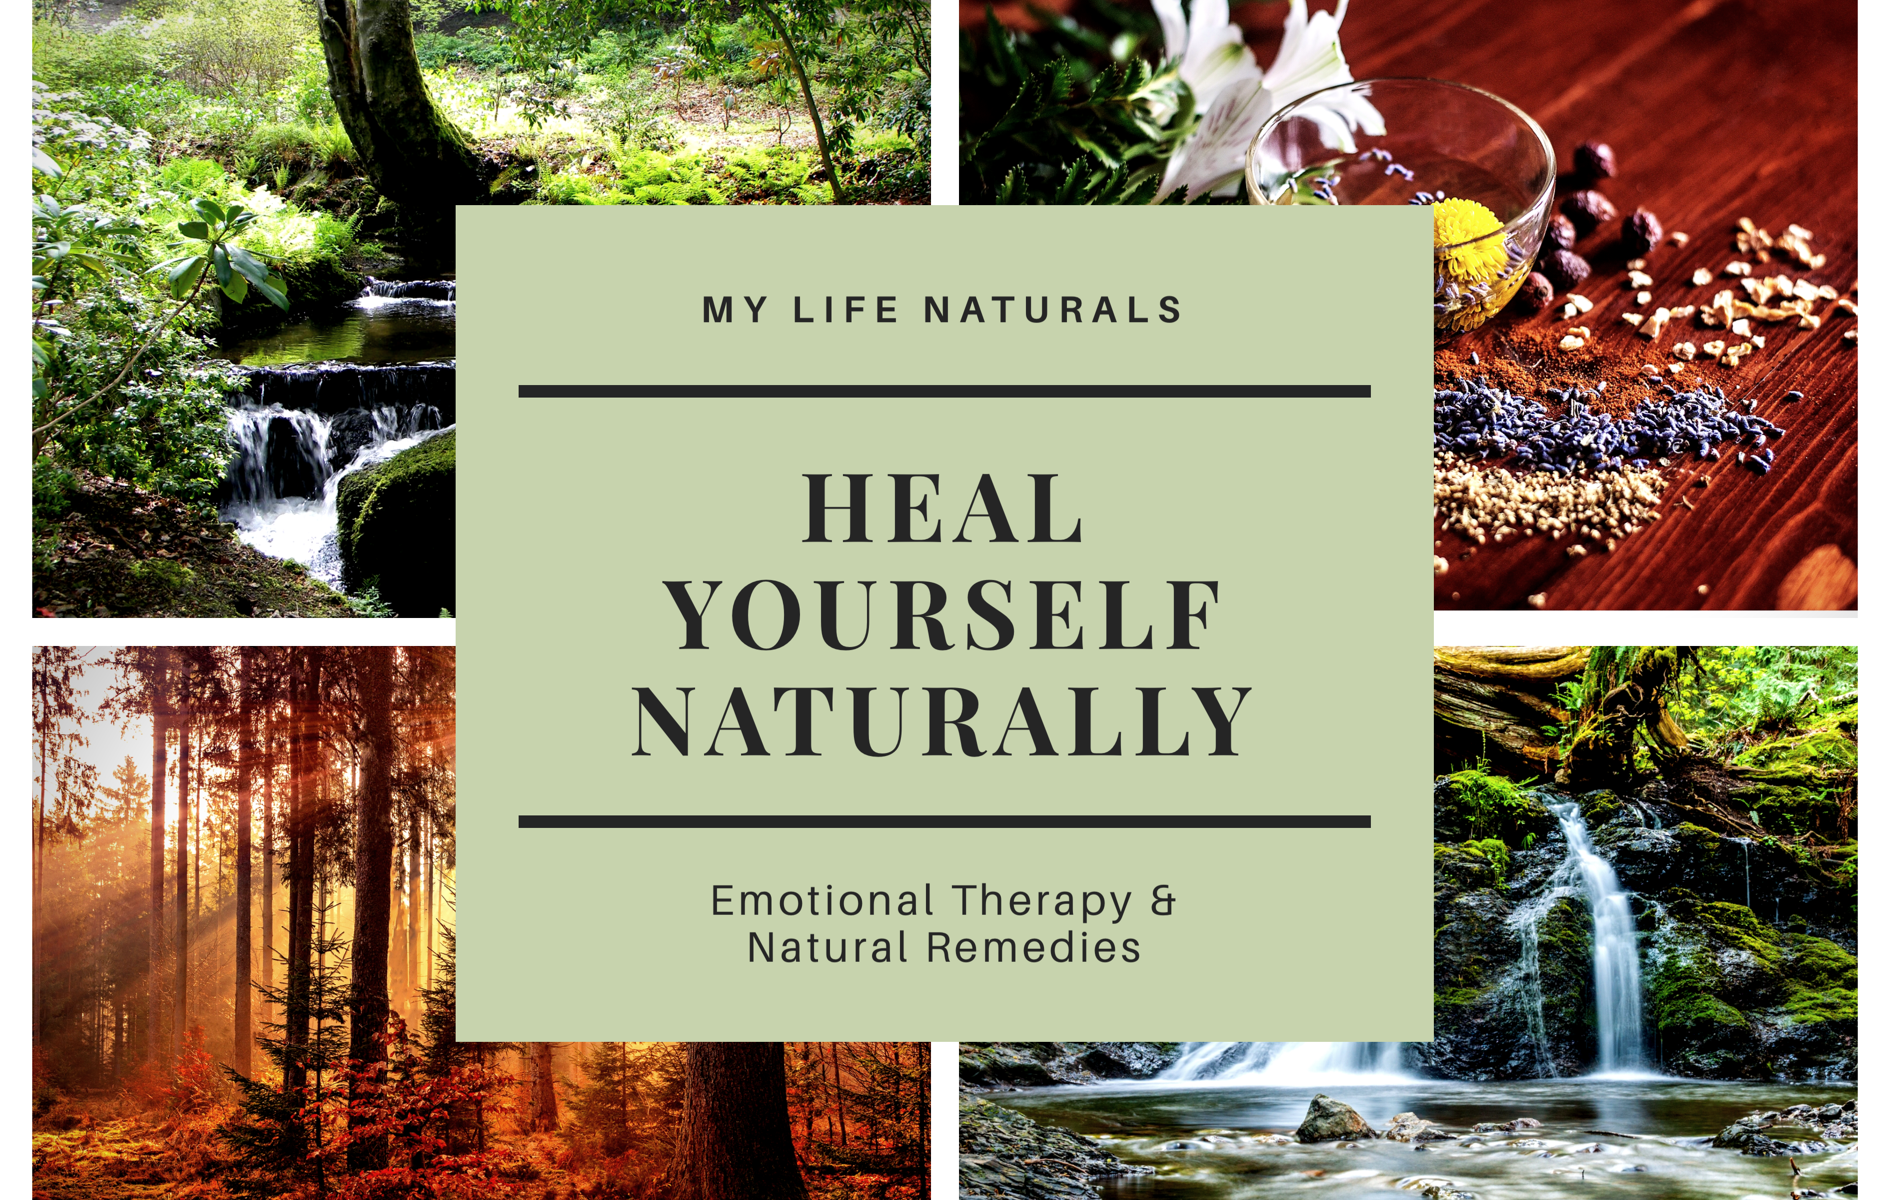 Emotional Therapy & Natural Remedies